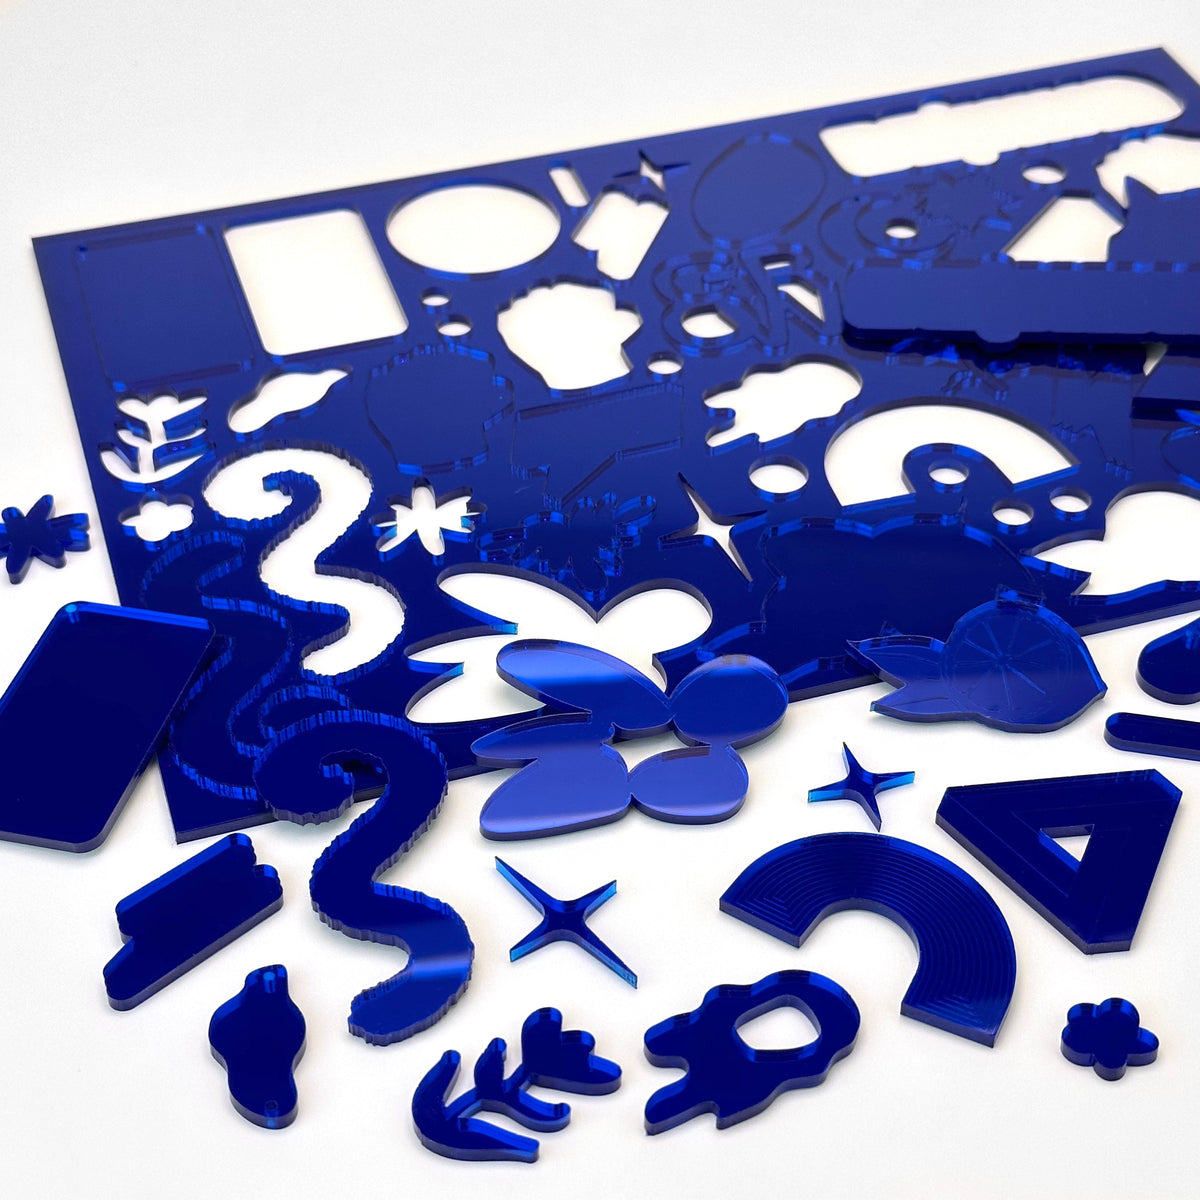 Mirror Blue Acrylic with laser cutting only - 600x400mm